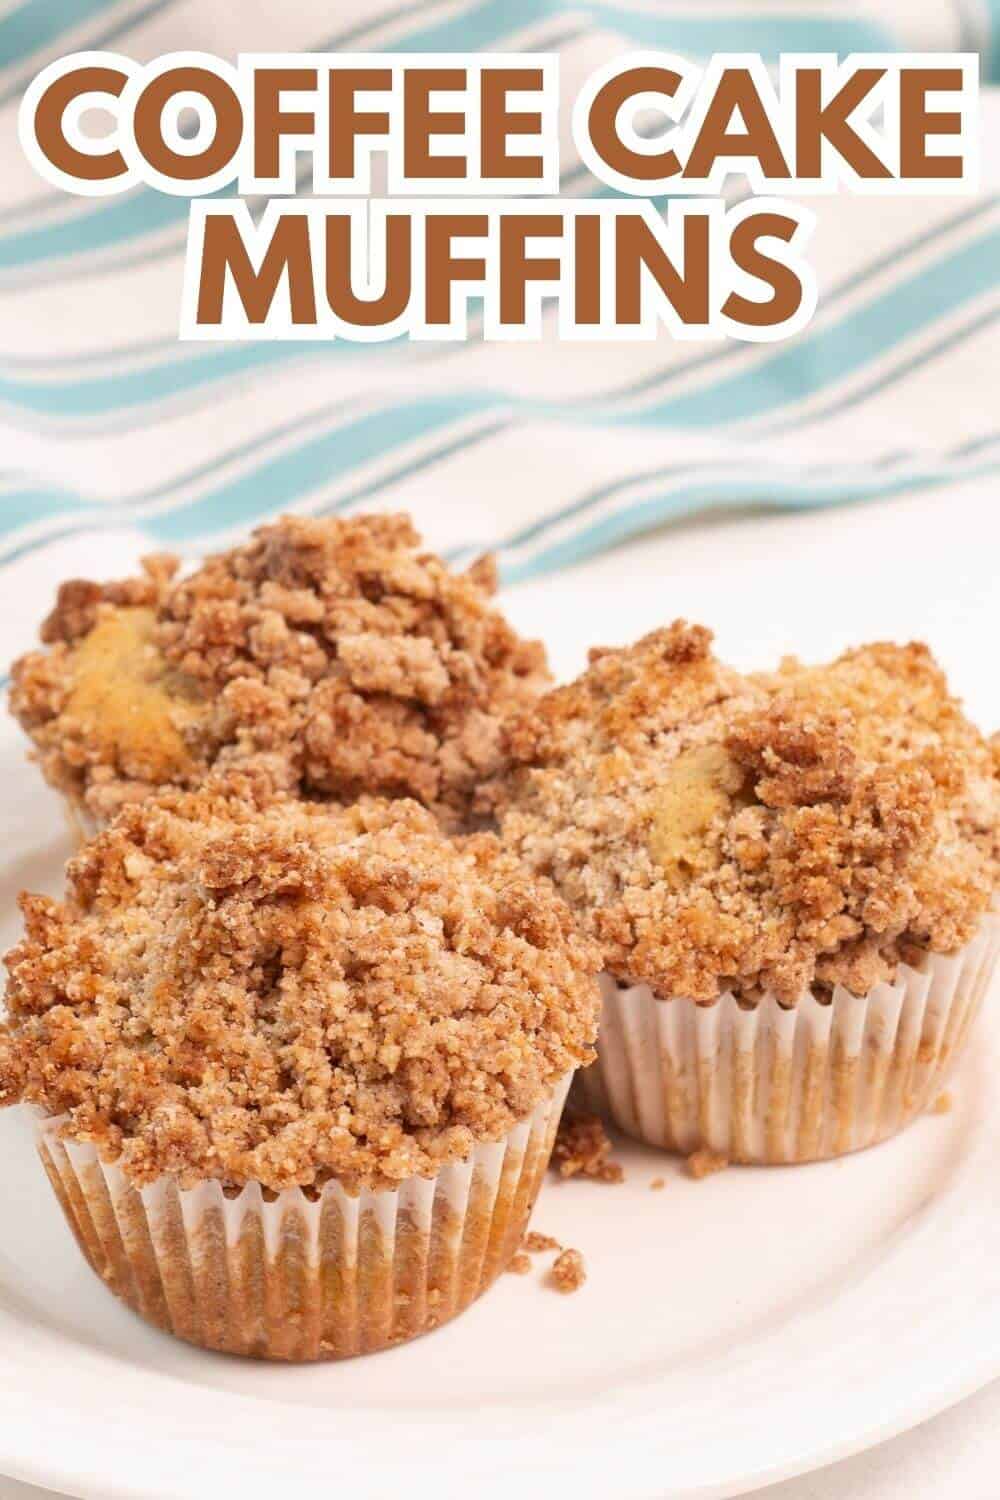 Cinnamon coffee cake muffins with title text.